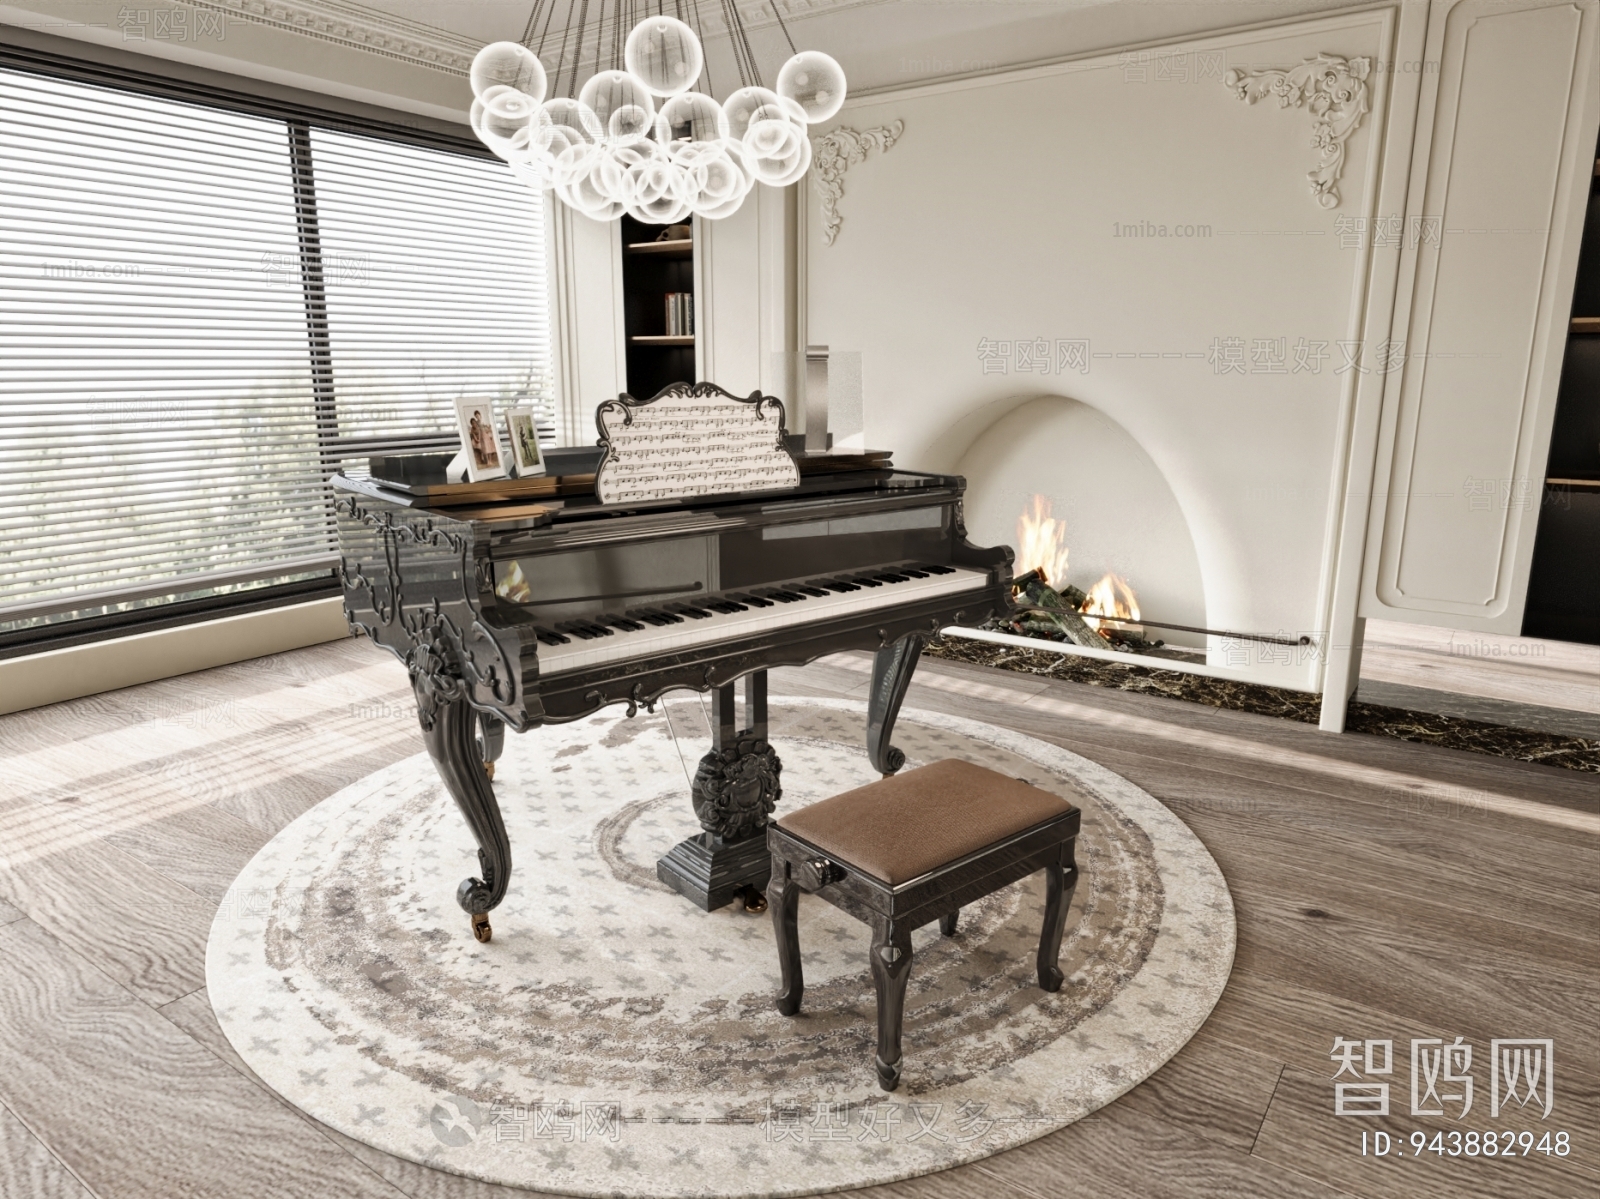 French Style Piano